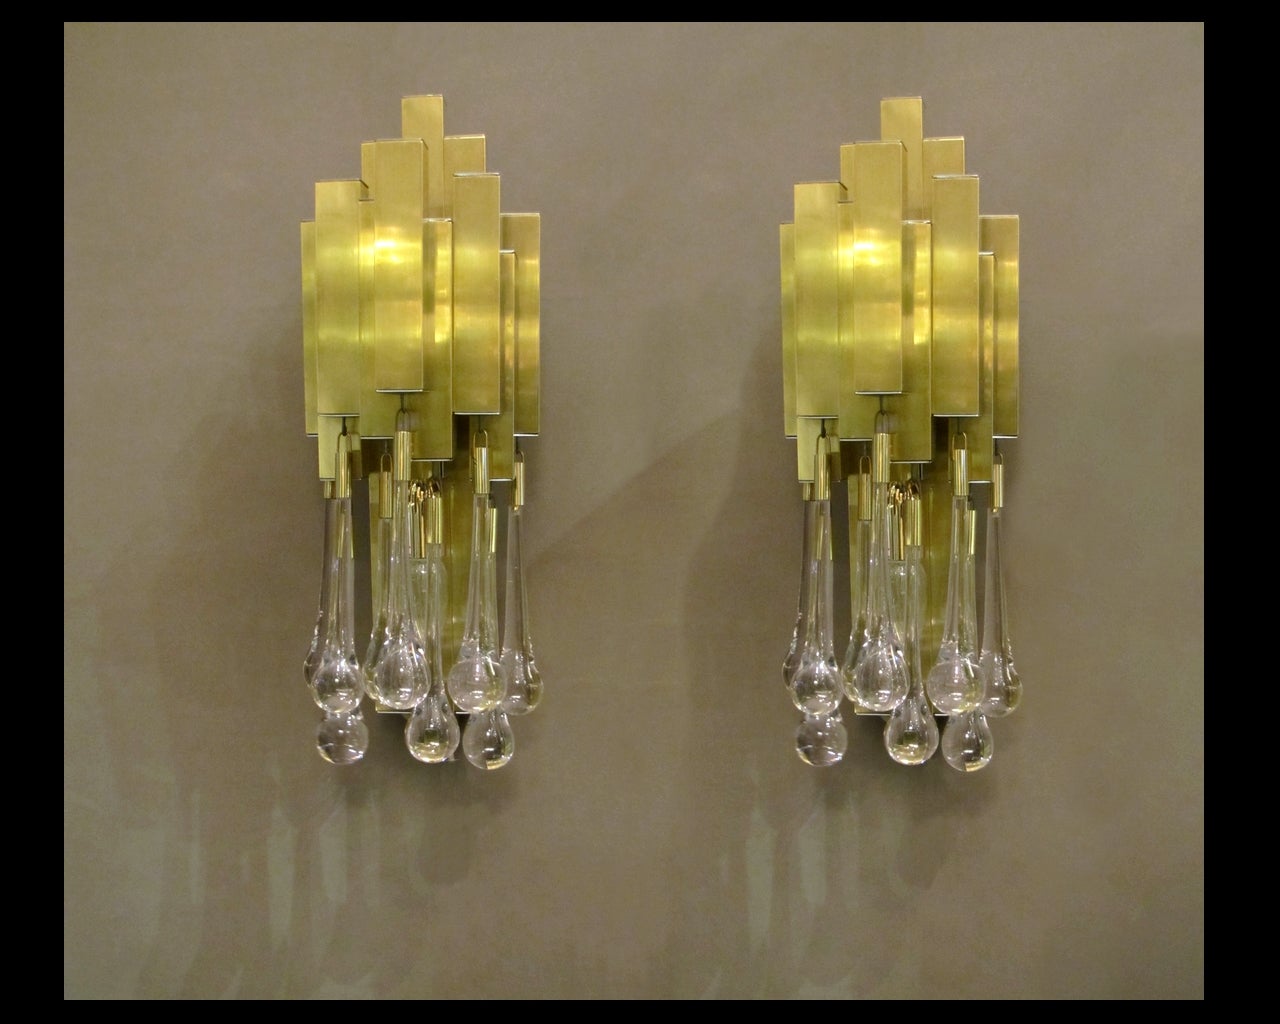 Gilded and chromed metal. Clear glass drops. Two lights by sconce.

Two pairs available. Price for one pair.